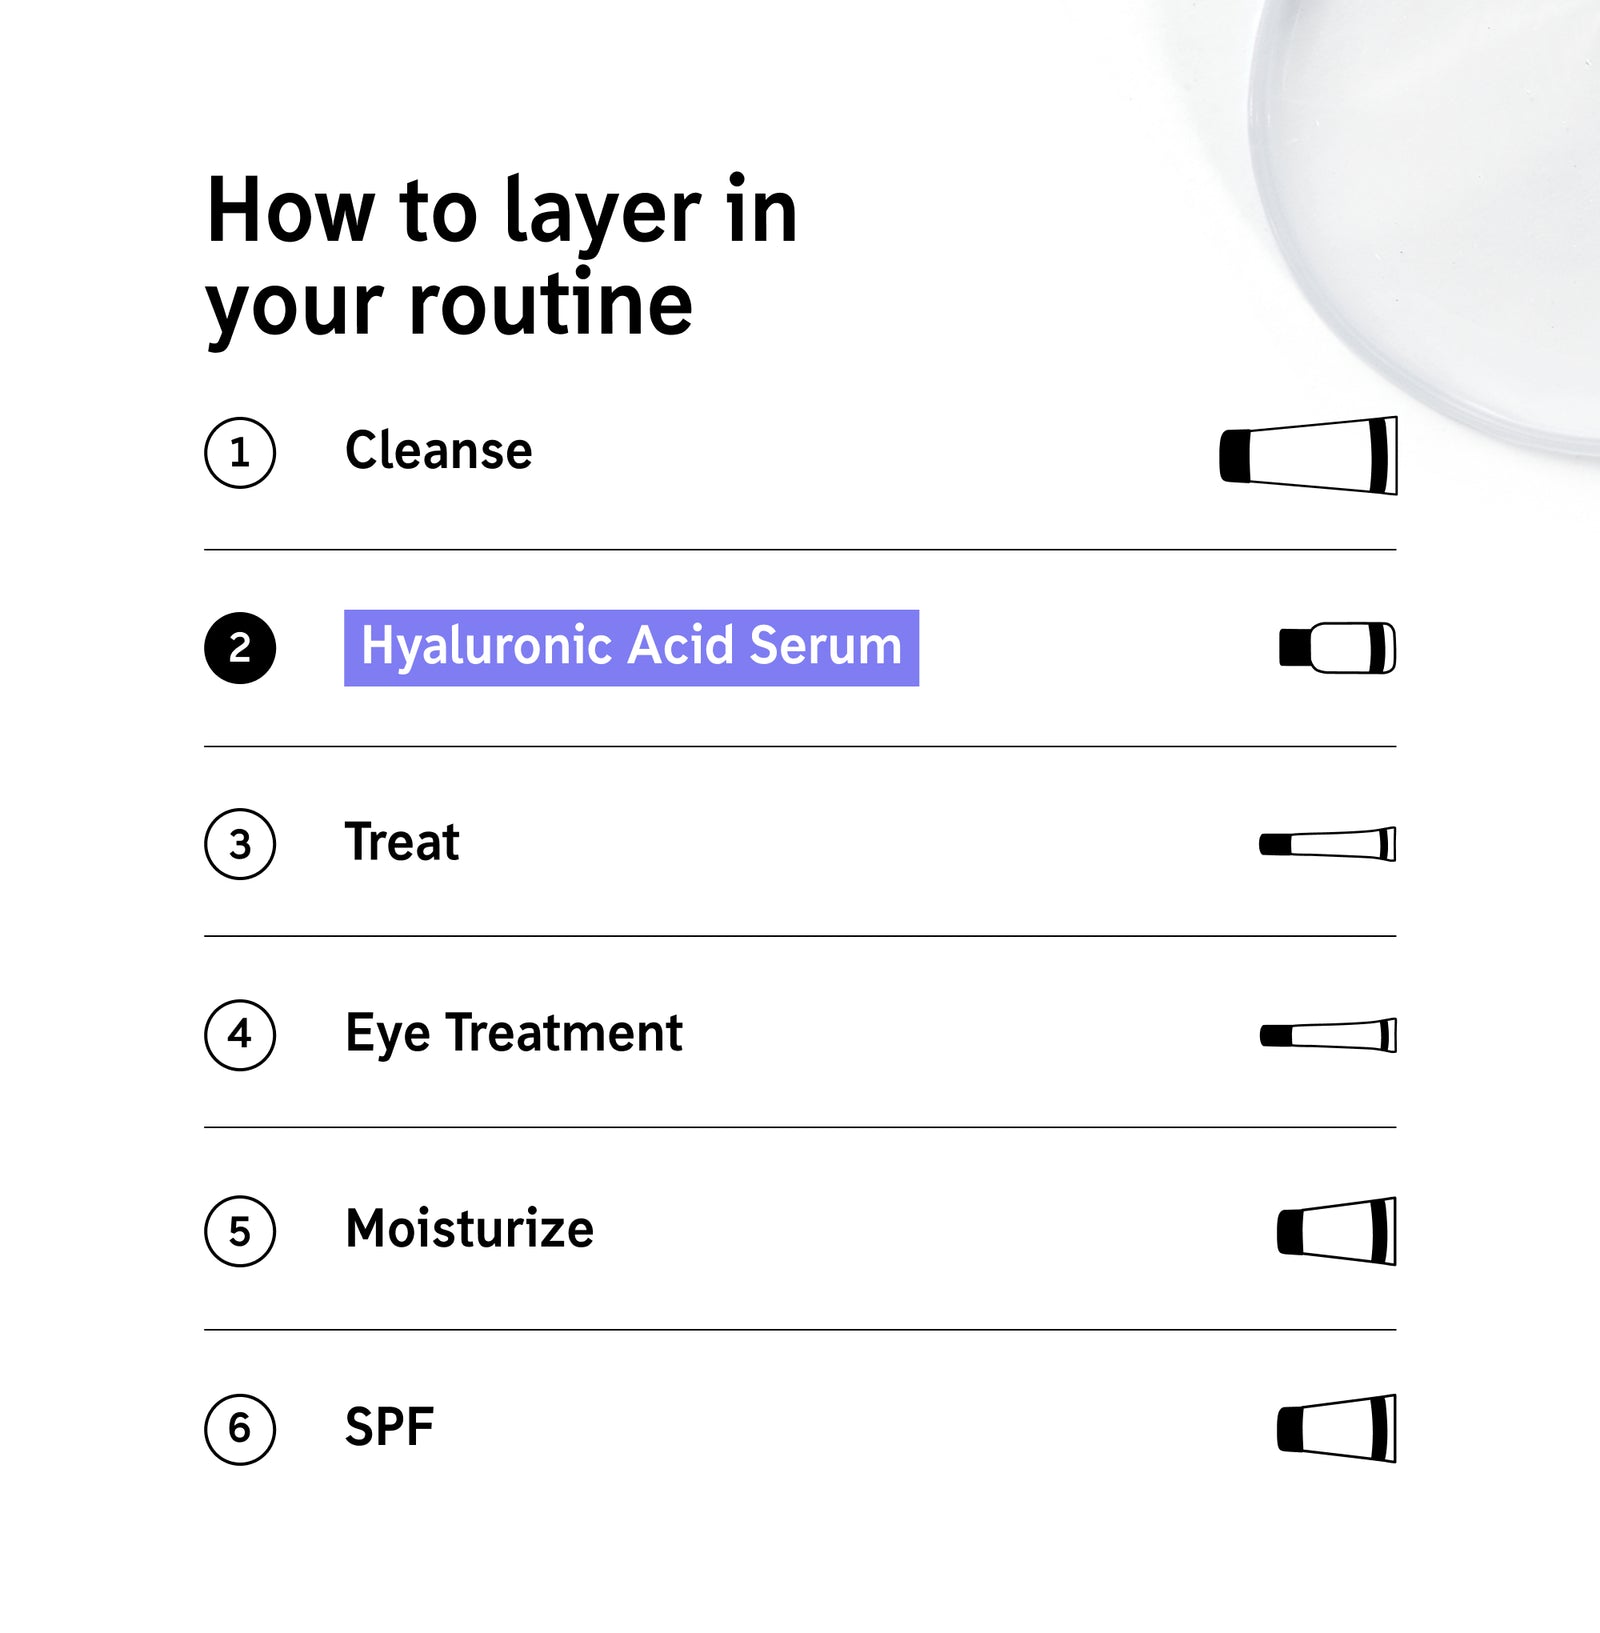 How to layer Hyaluronic Acid Serum in your routine